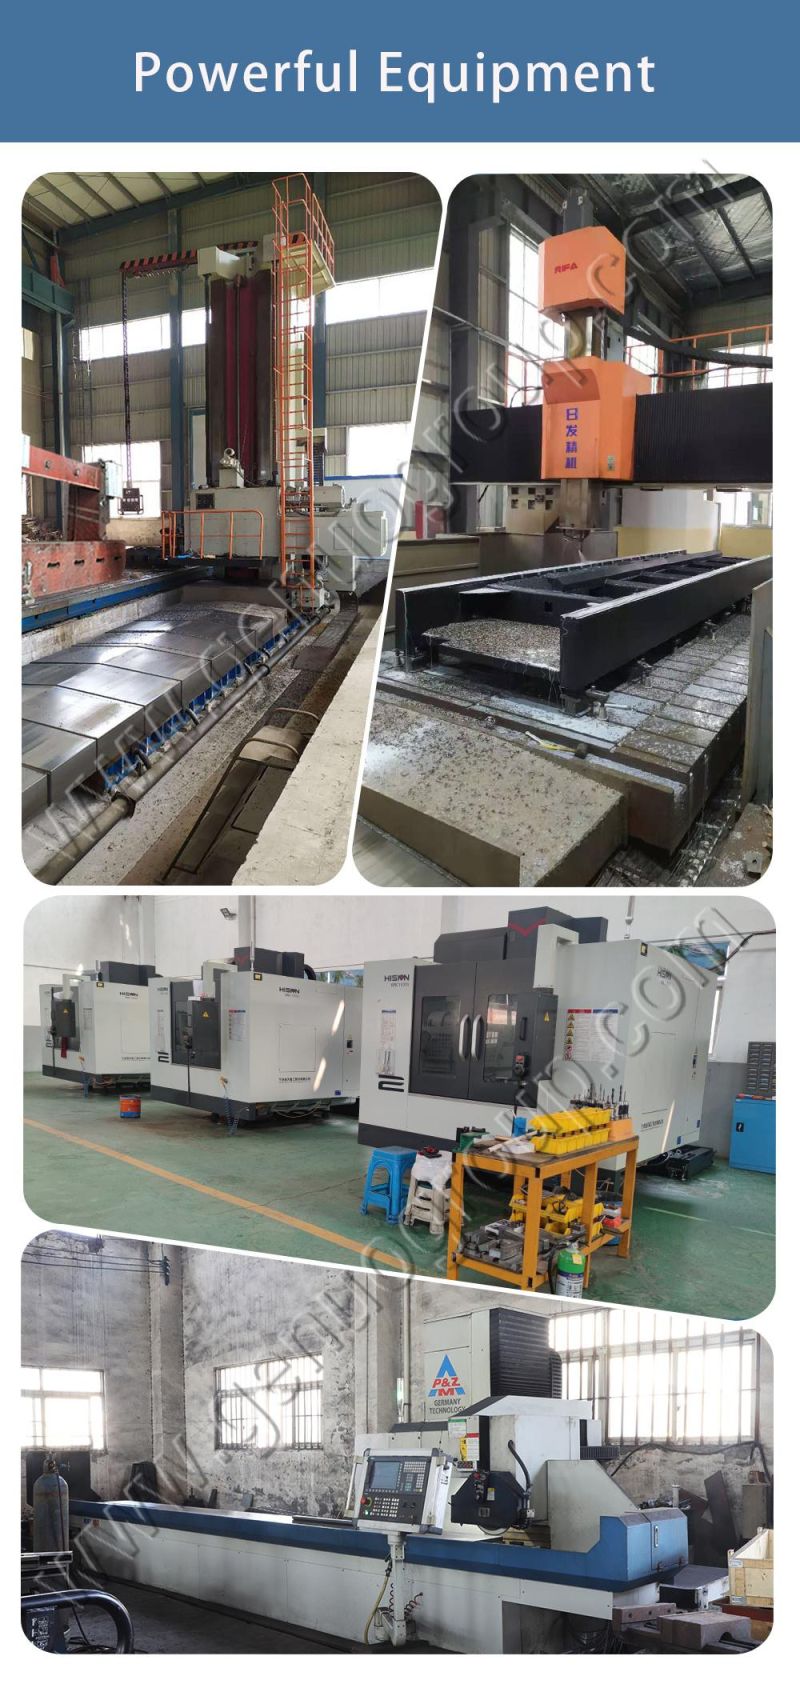 Gn 6020 LC 3000W Single Table Laser Cutting Machine